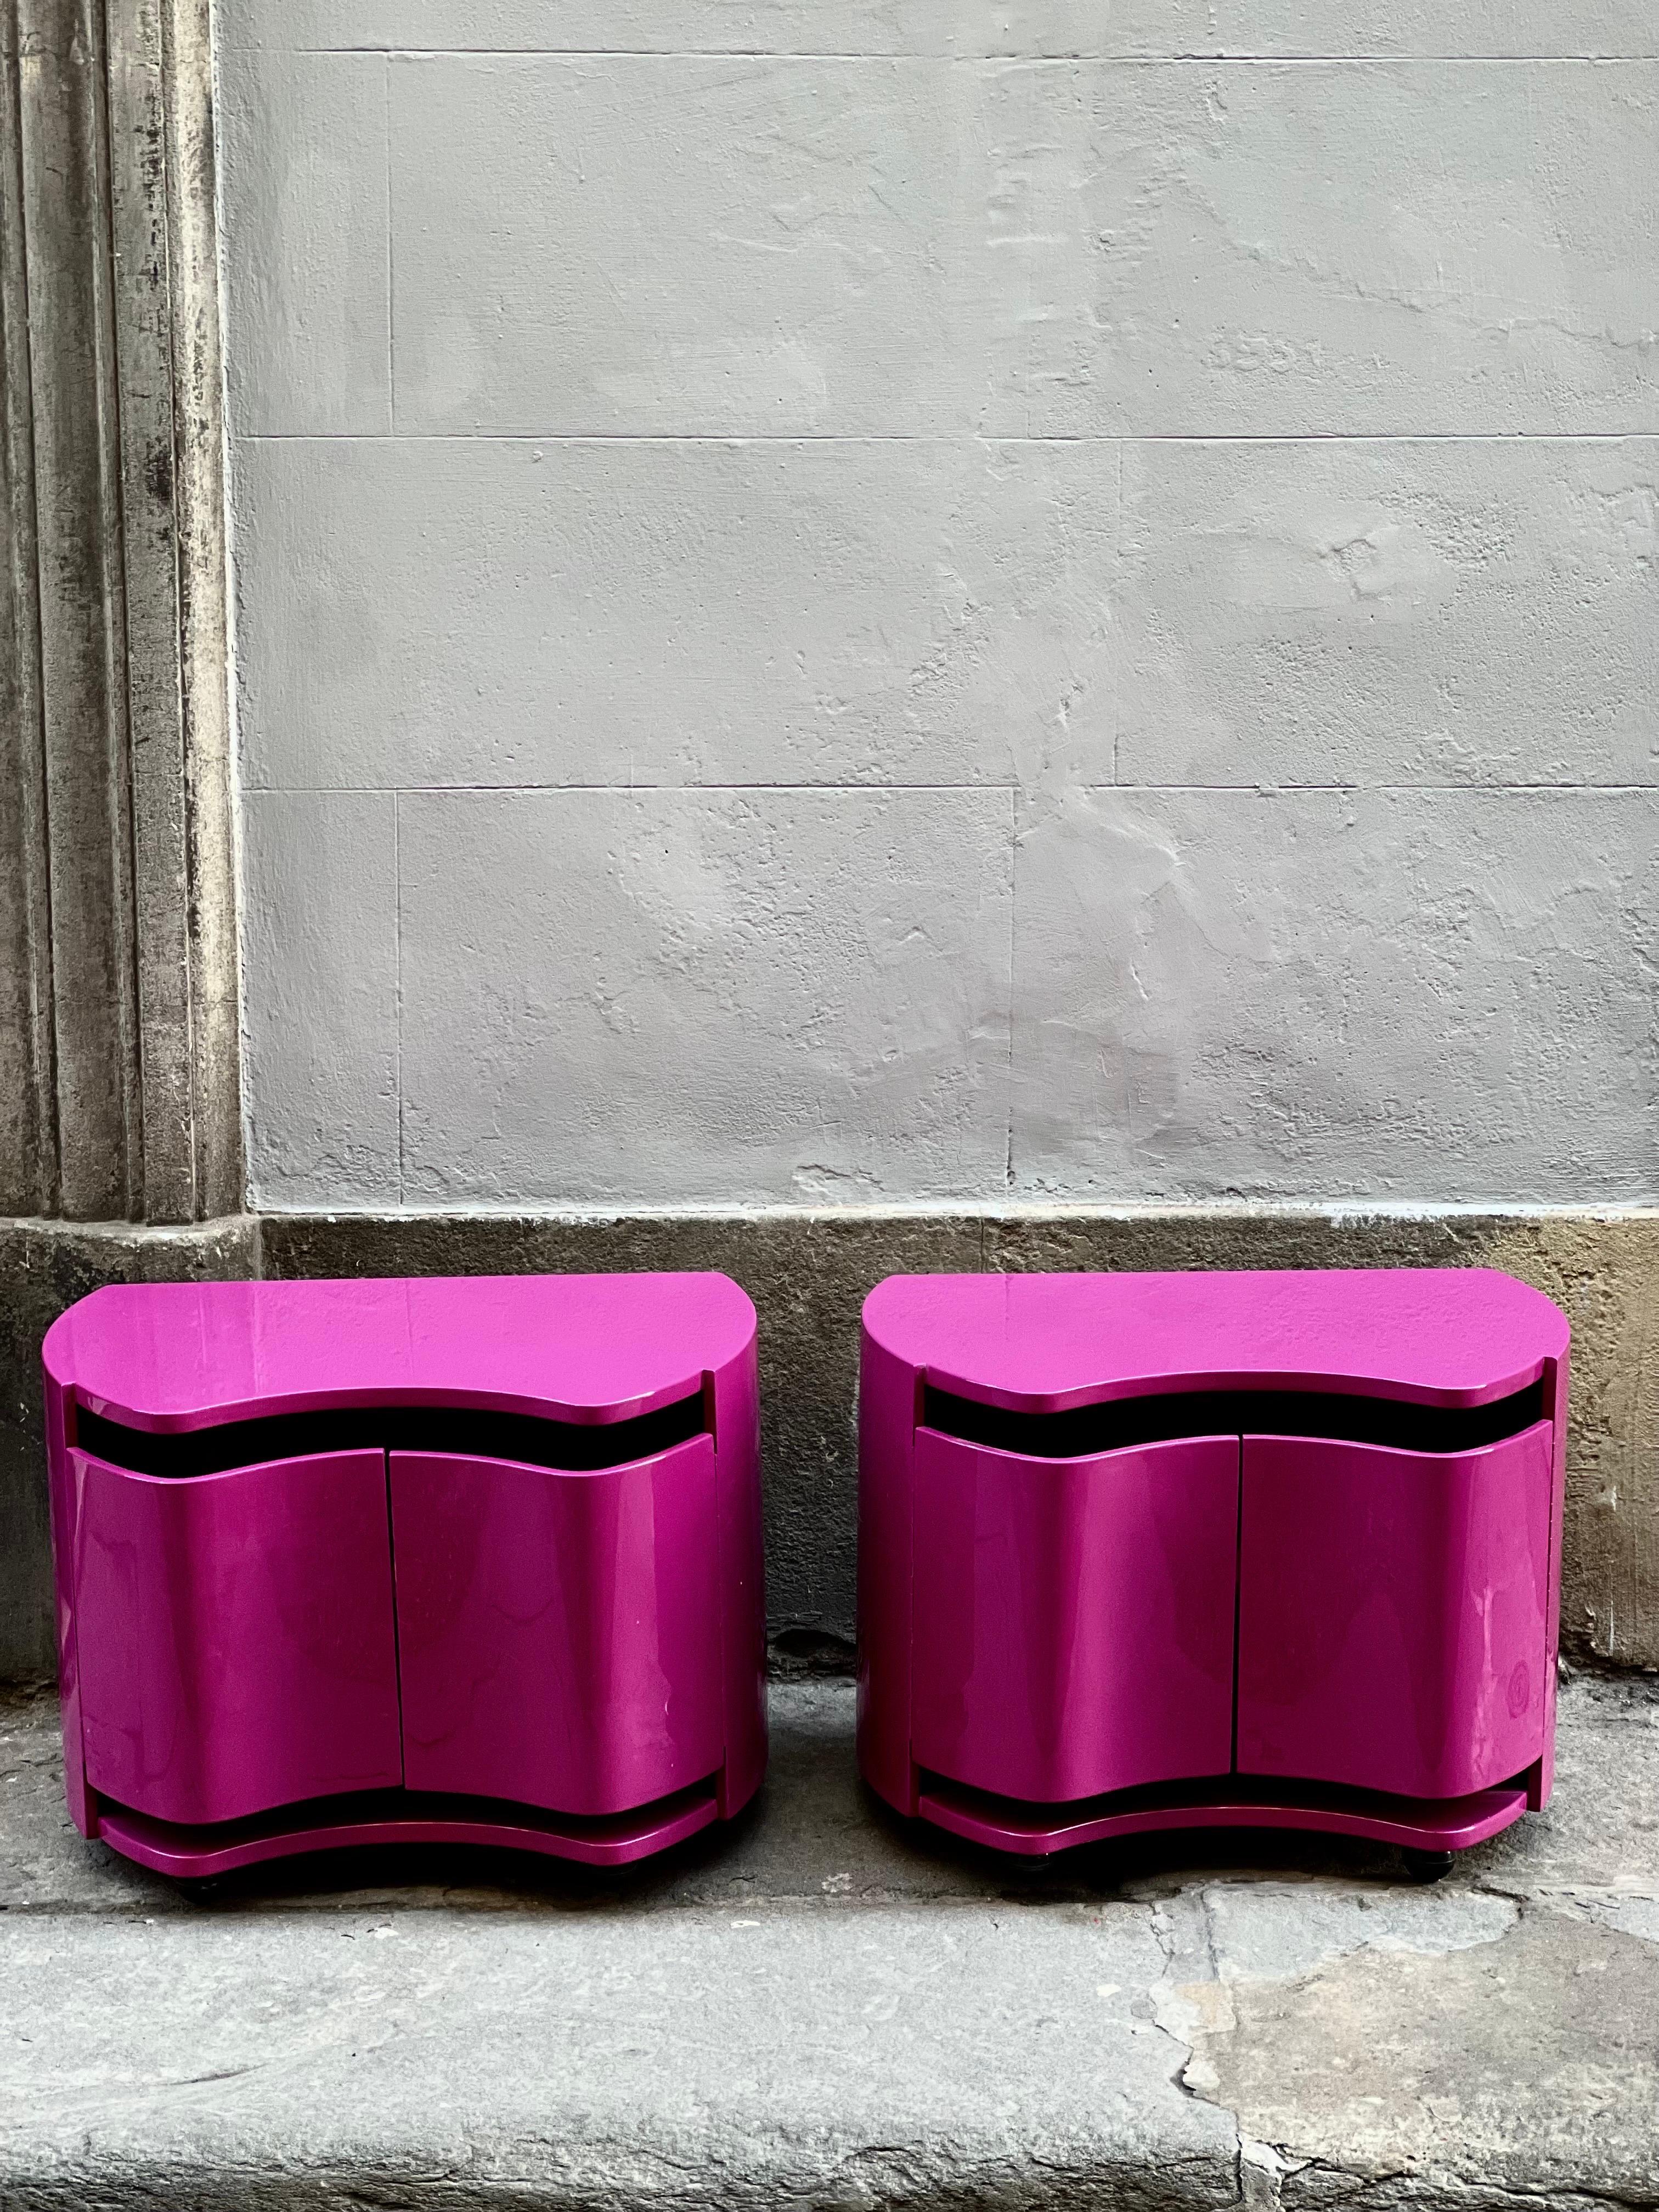 Pair of Cyclamen color Lacquered Resin night stands by Benatti, Italy 1966.
Playful curved night stands, created by Italian manufacturer Benatti in 1966 finished in high gloss cyclamen lacquer.
The manufacturer captured the innovative Pop Art spirit